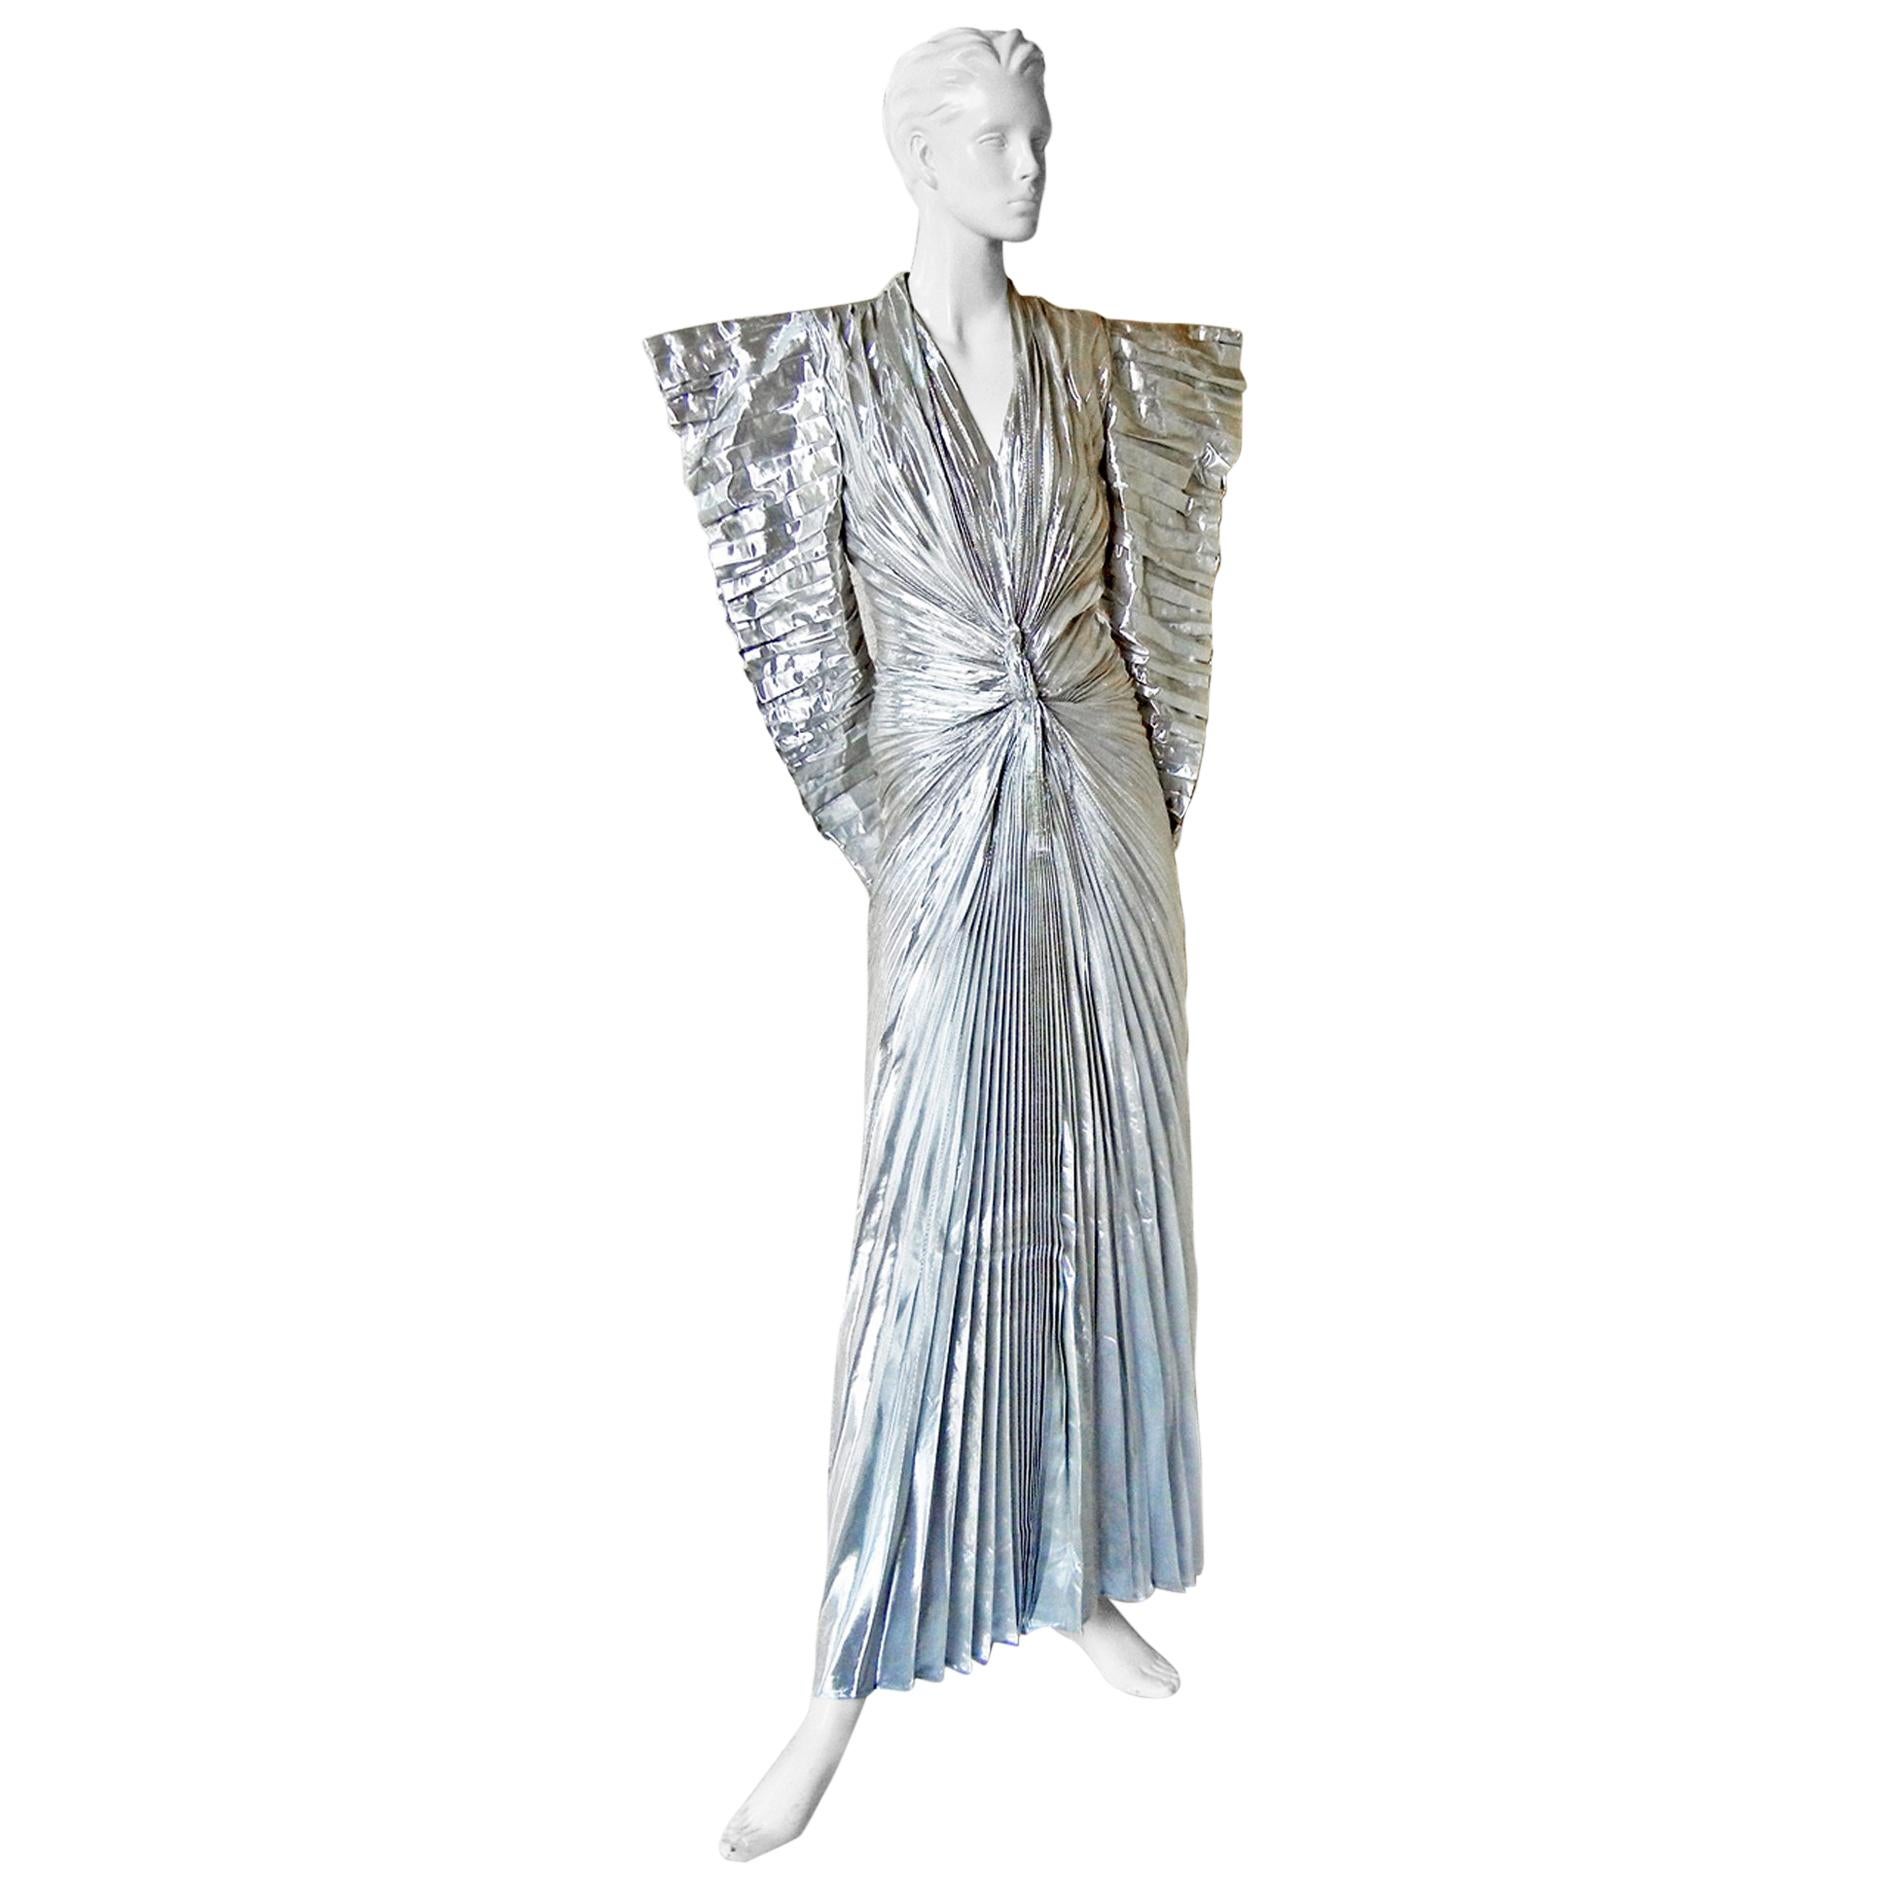  Thierry Mugler 1979 "The Future is Now" Silver Lame Futuristic Dress  